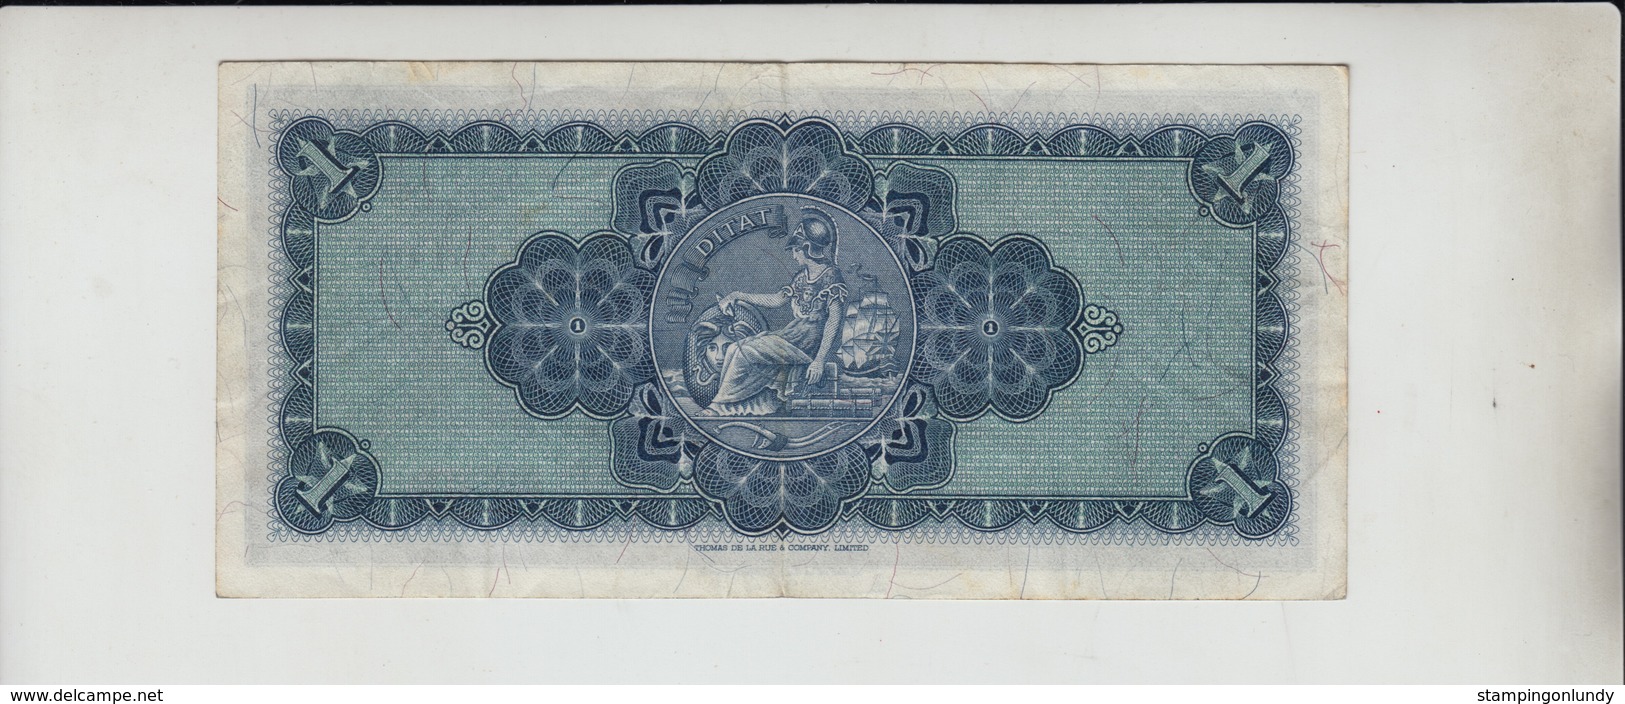 AB427. The British Linen Bank £1 Banknote 31st March 1962 #X/3 301402 FREE UK P+P - 1 Pound